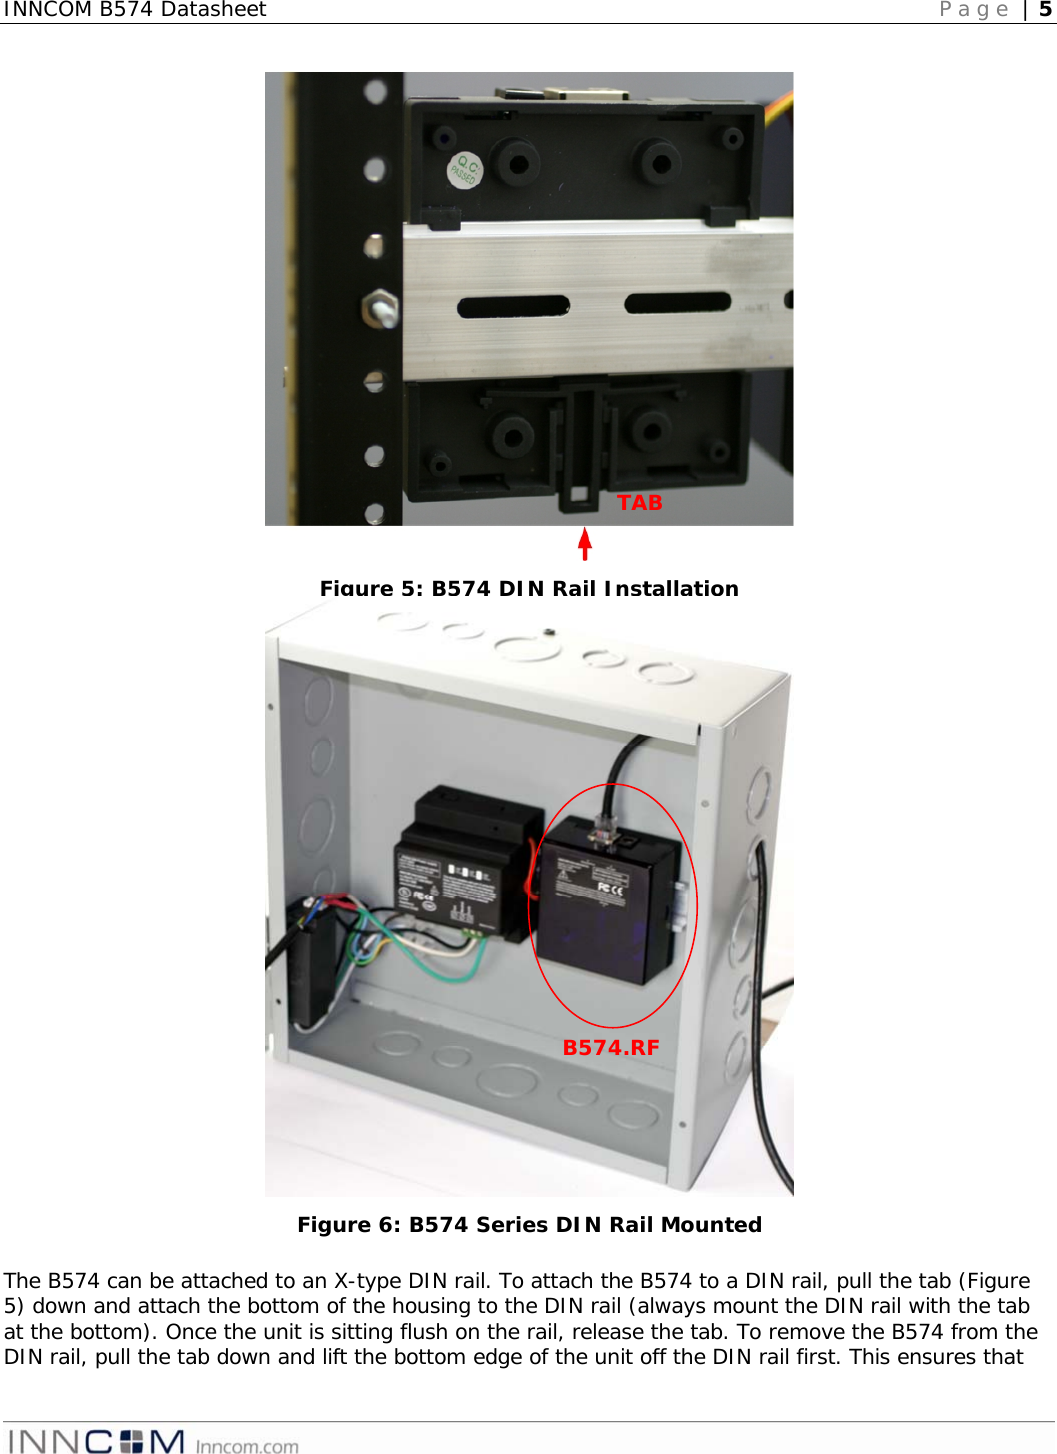 INNCOM B574 Datasheet   Page | 5                                                  The B574 can be attached to an X-type DIN rail. To attach the B574 to a DIN rail, pull the tab (Figure 5) down and attach the bottom of the housing to the DIN rail (always mount the DIN rail with the tab at the bottom). Once the unit is sitting flush on the rail, release the tab. To remove the B574 from the DIN rail, pull the tab down and lift the bottom edge of the unit off the DIN rail first. This ensures that TAB Figure 5: B574 DIN Rail Installation B574.RF Figure 6: B574 Series DIN Rail Mounted 